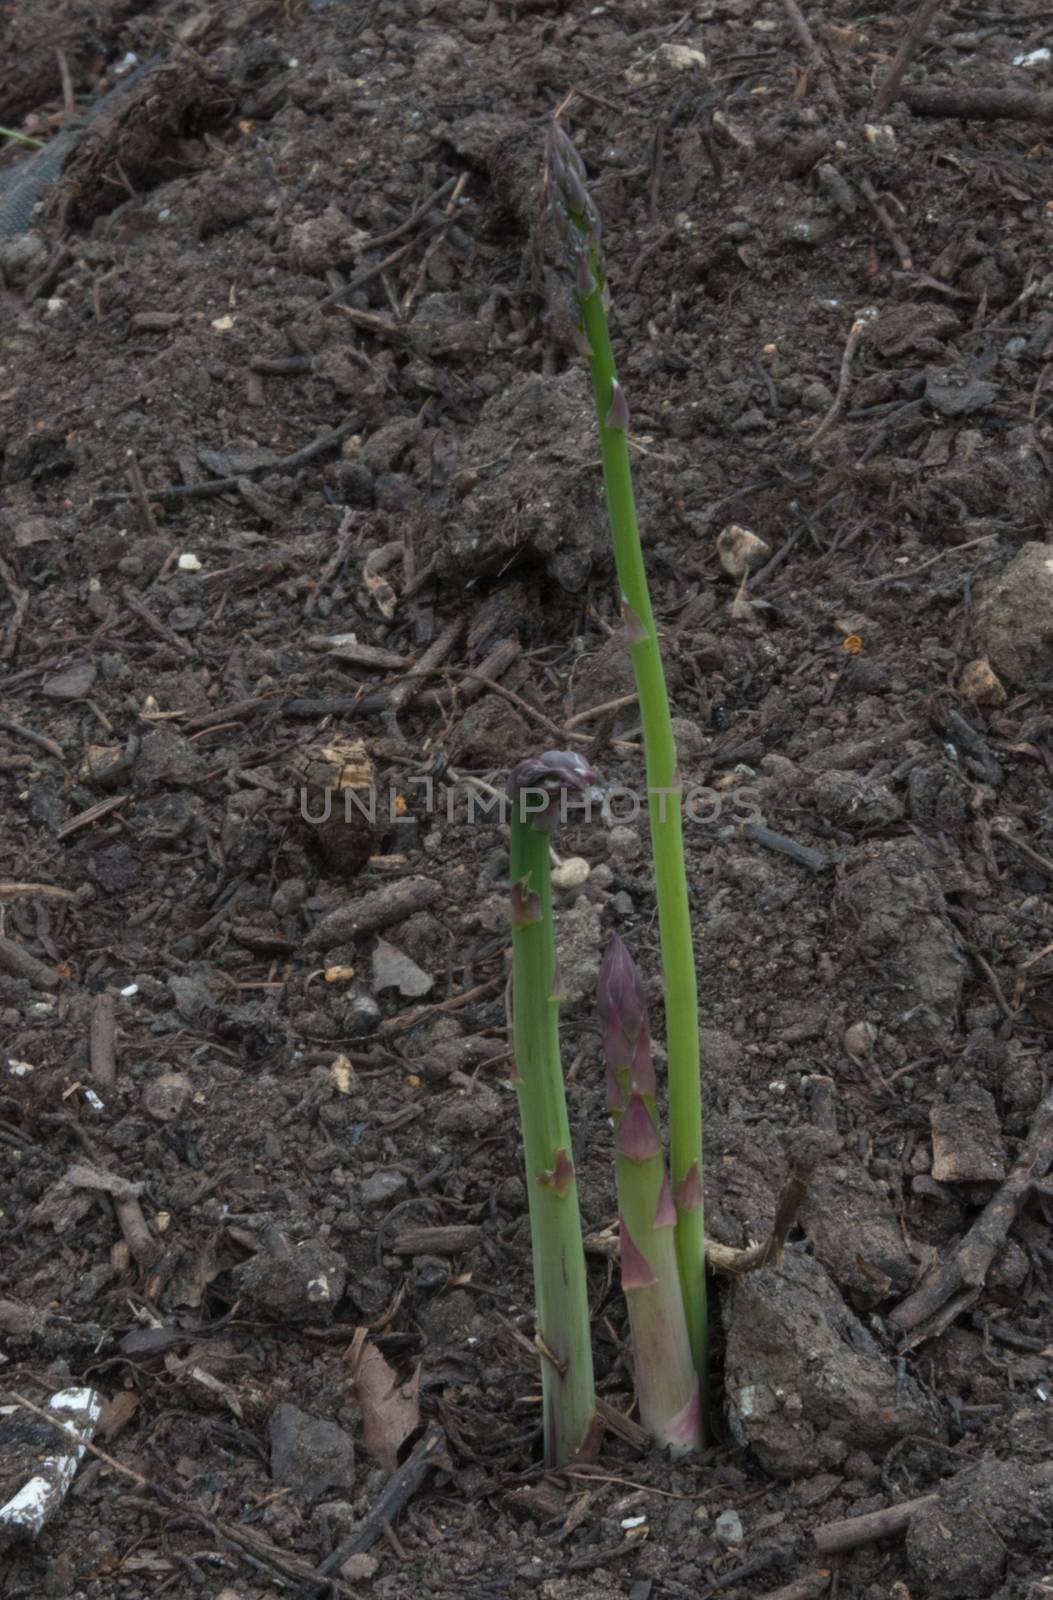 Asparagus Growing in Garden by TimAwe